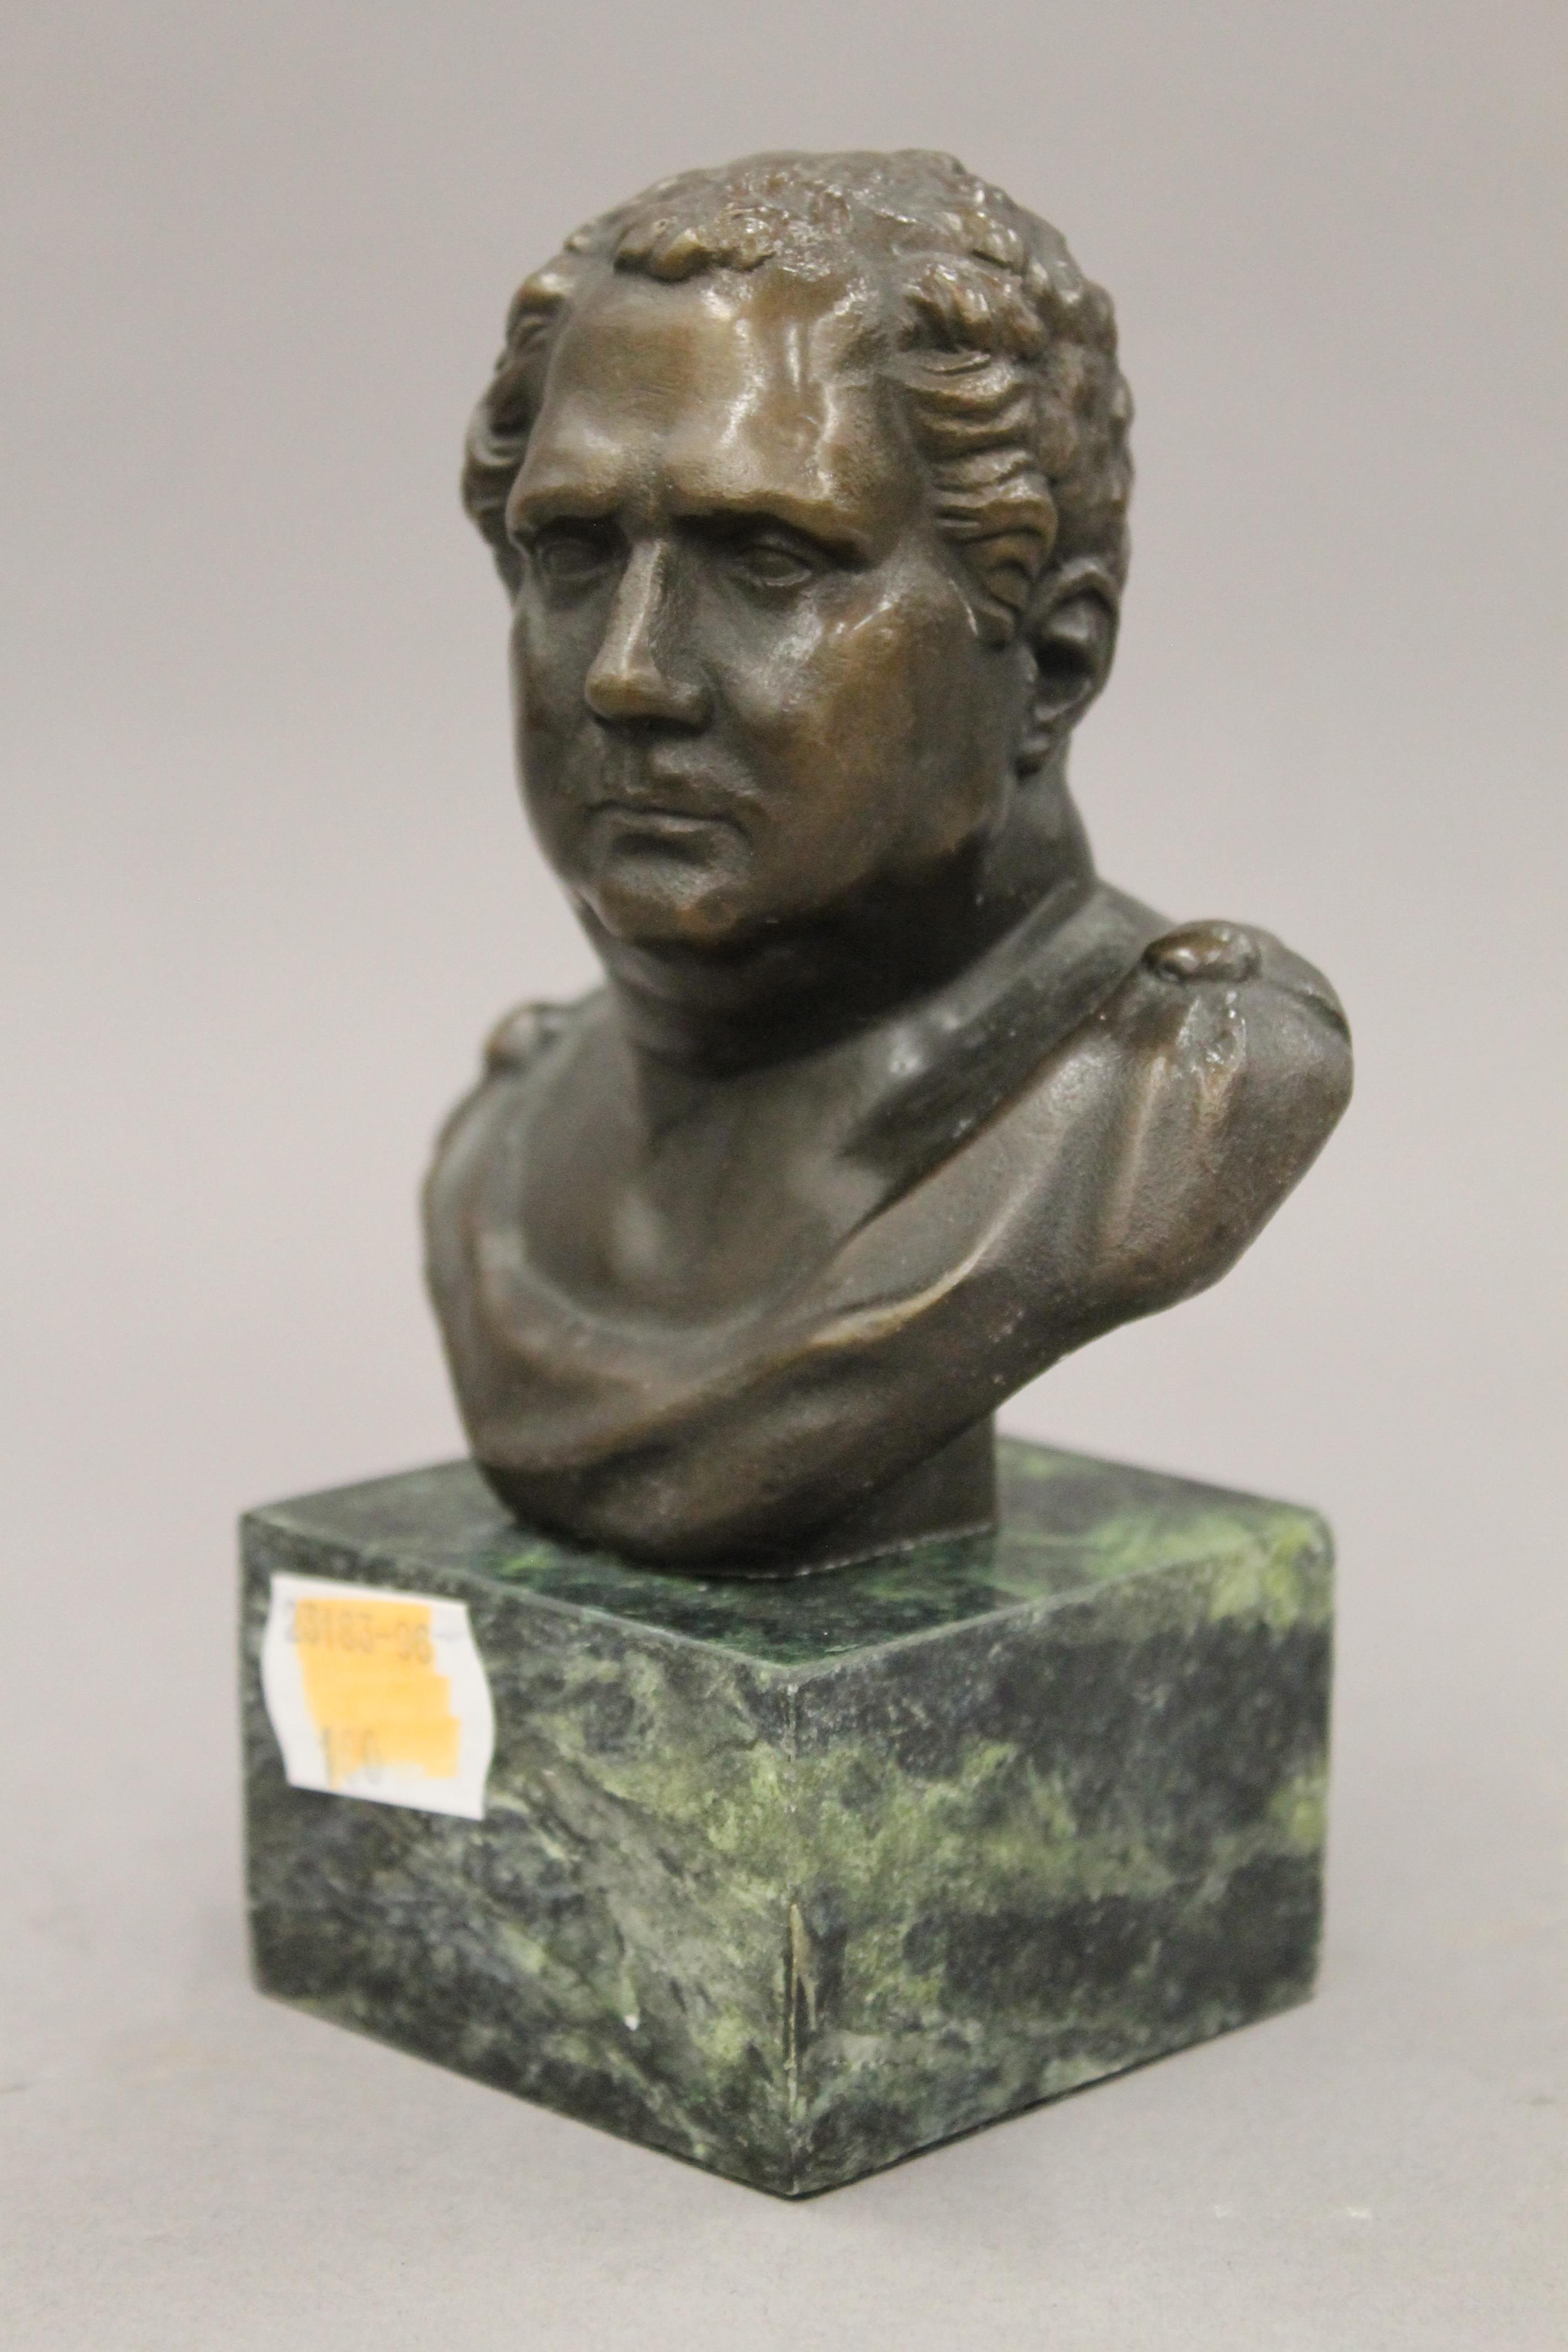 A small bronze bust of a classical figure. 14 cm high. - Image 4 of 4